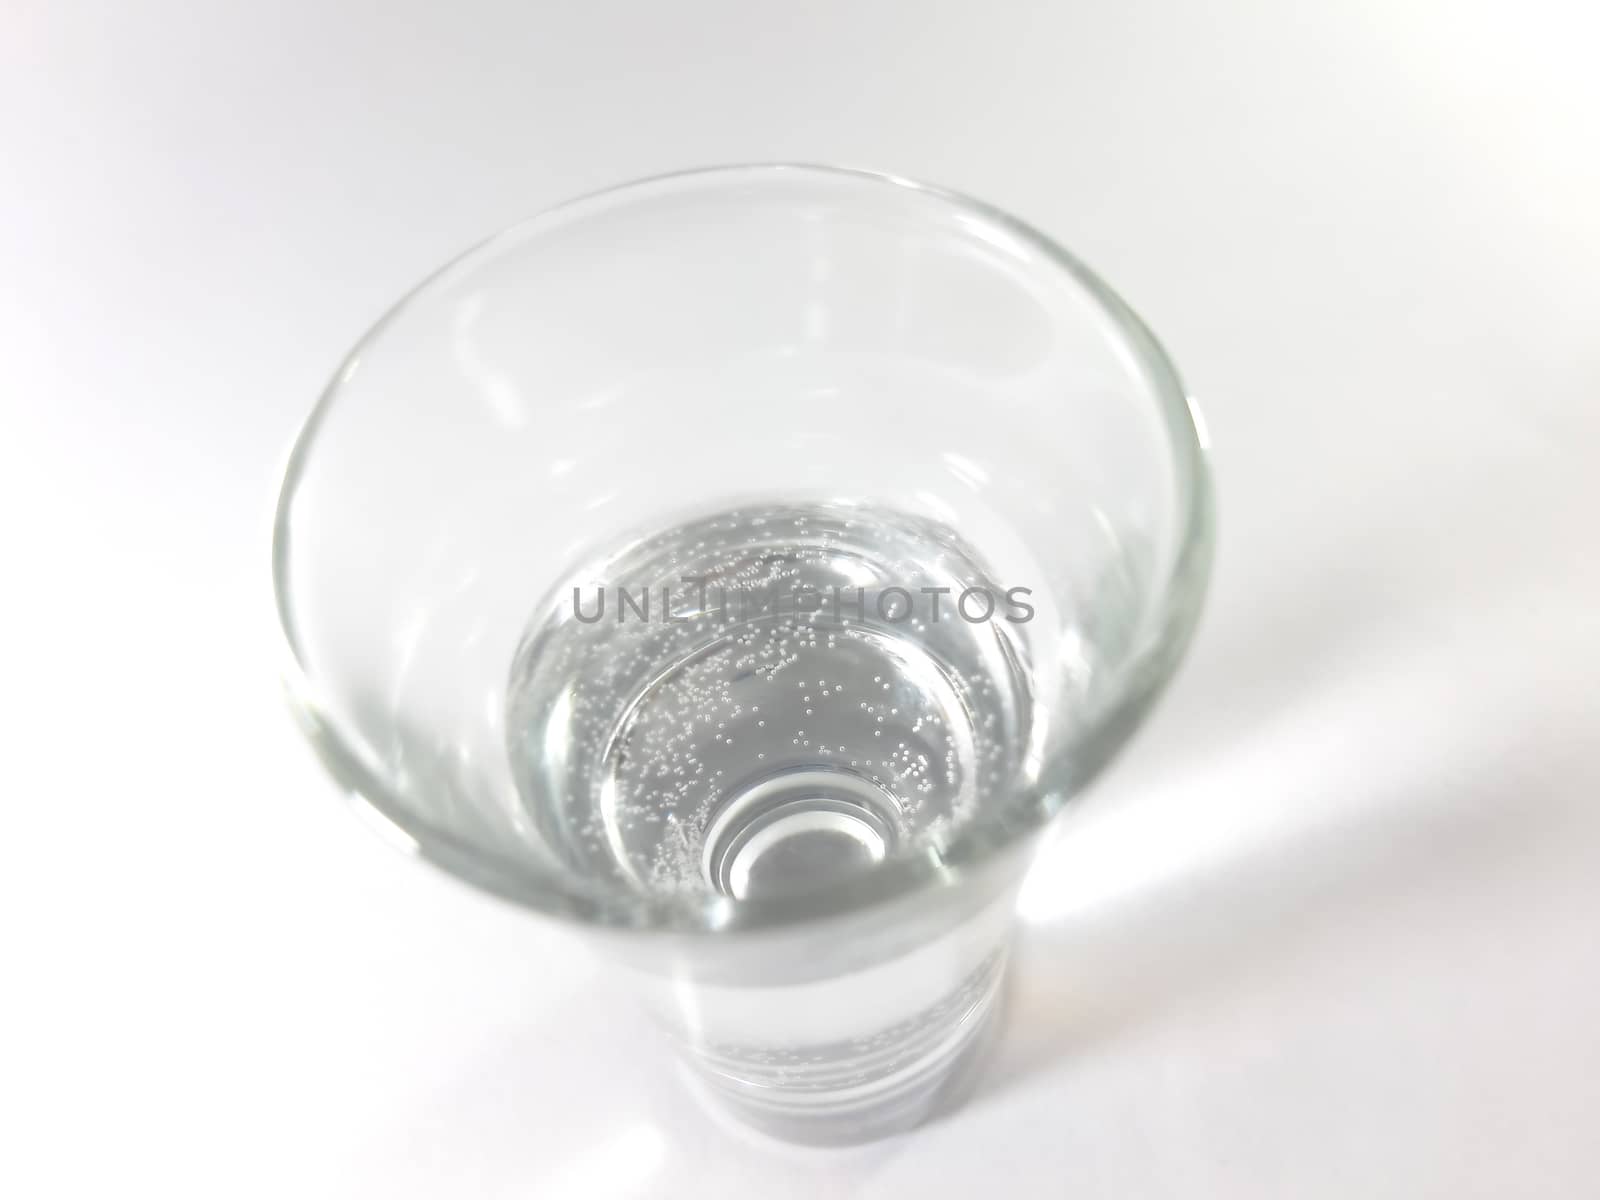 Drink in transparent glass. Liquid pure water in a glass. Photo isolated.